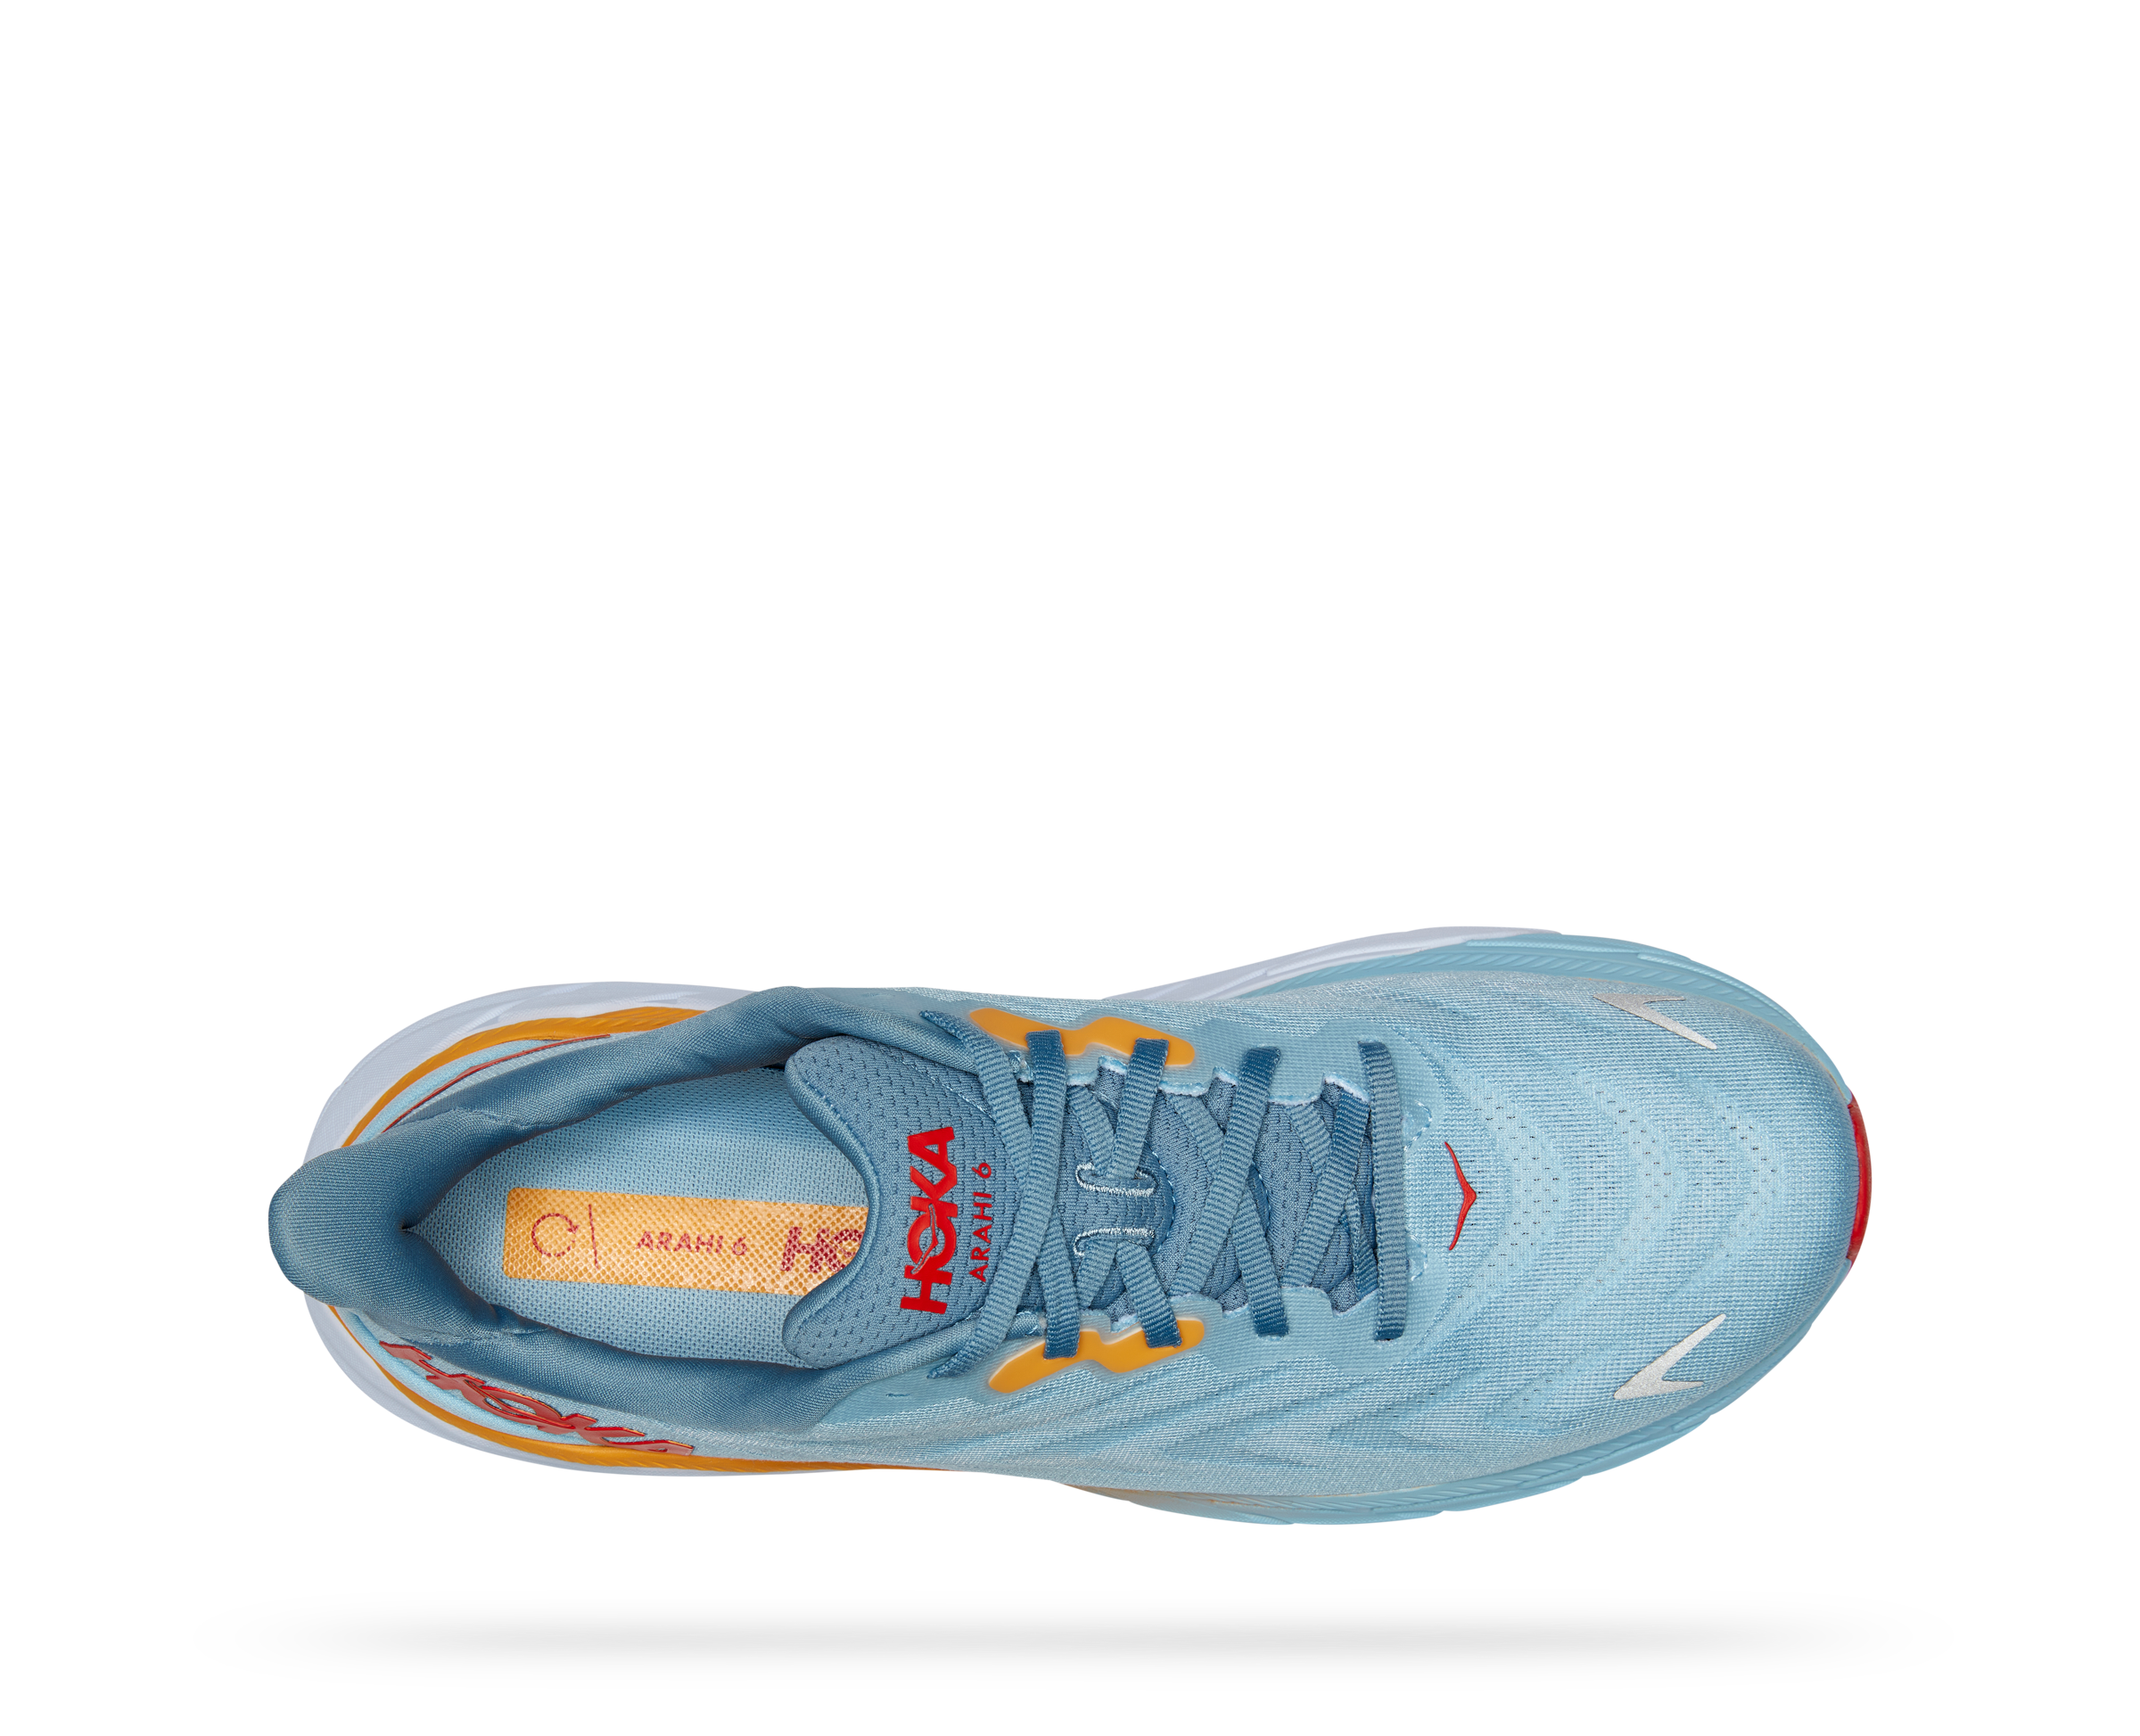 Top view of the Men's Arahi 6 by HOKA in the color Summer Song/Mountain Spring